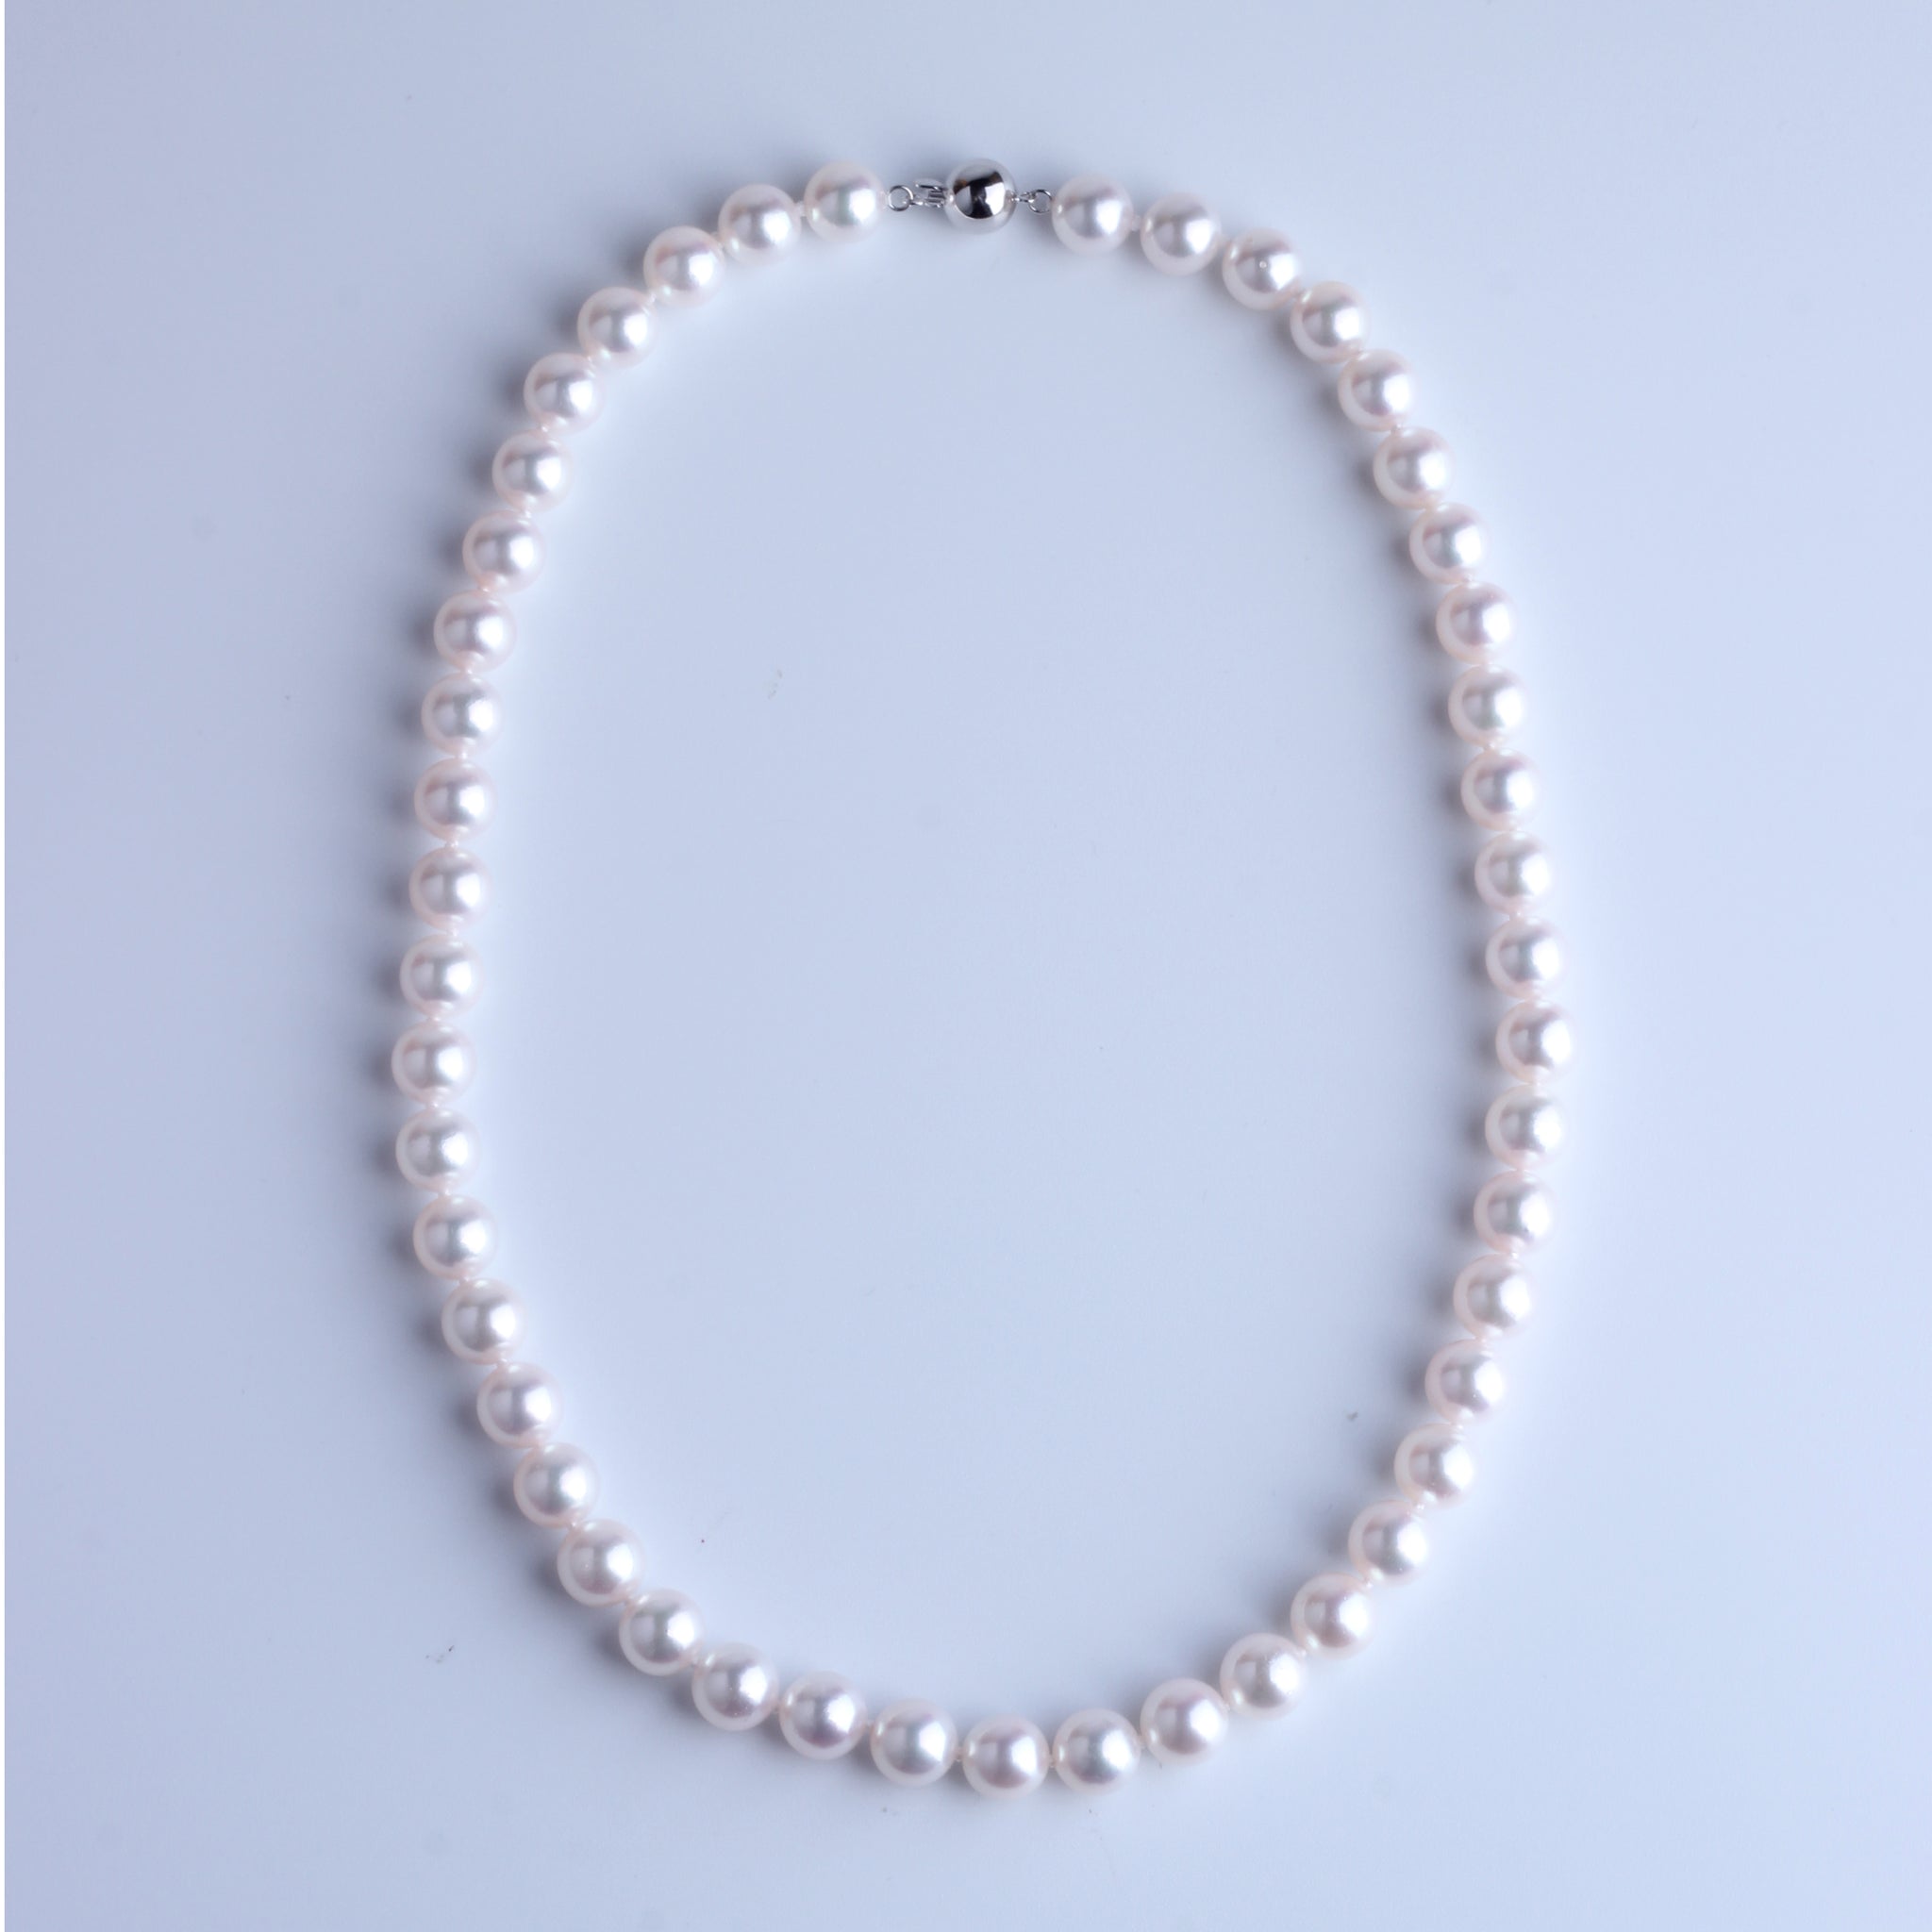 Japan Akoya Pearl Necklace 8.5-9mm - Woment Designer Jewelry